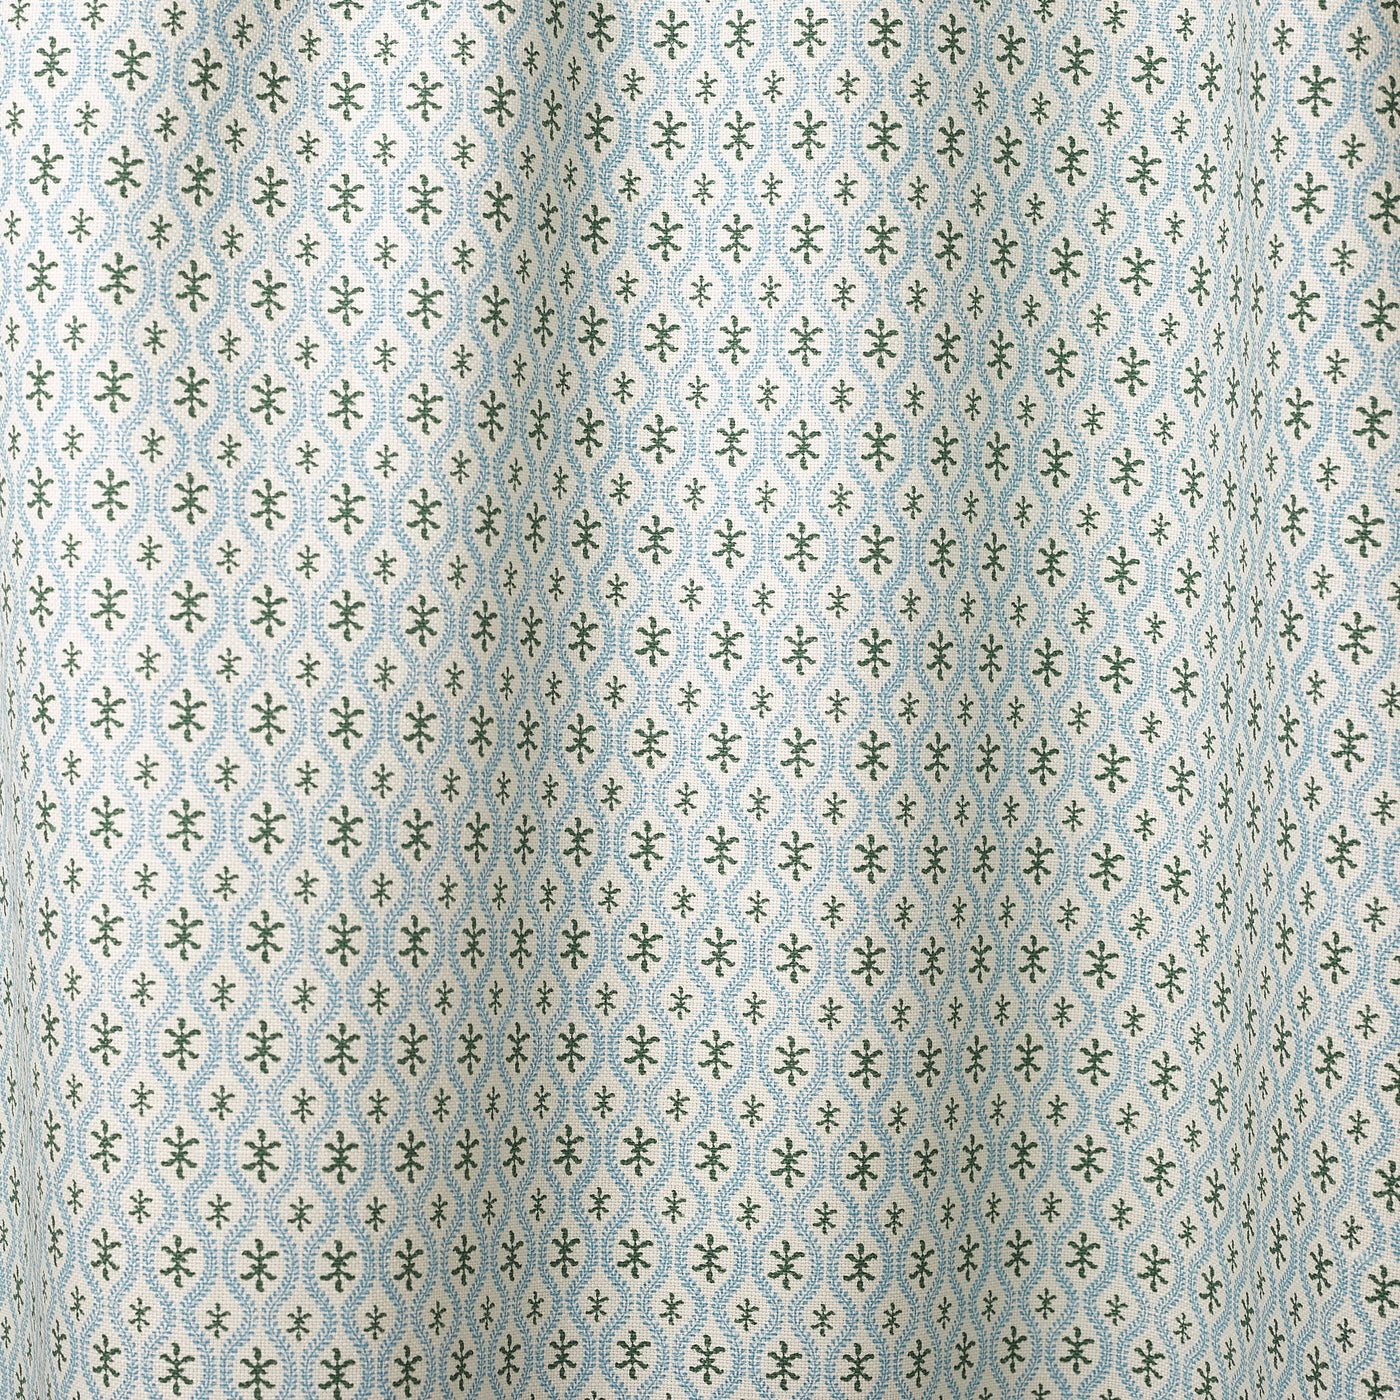 Dausa Fabric in Olive Delft